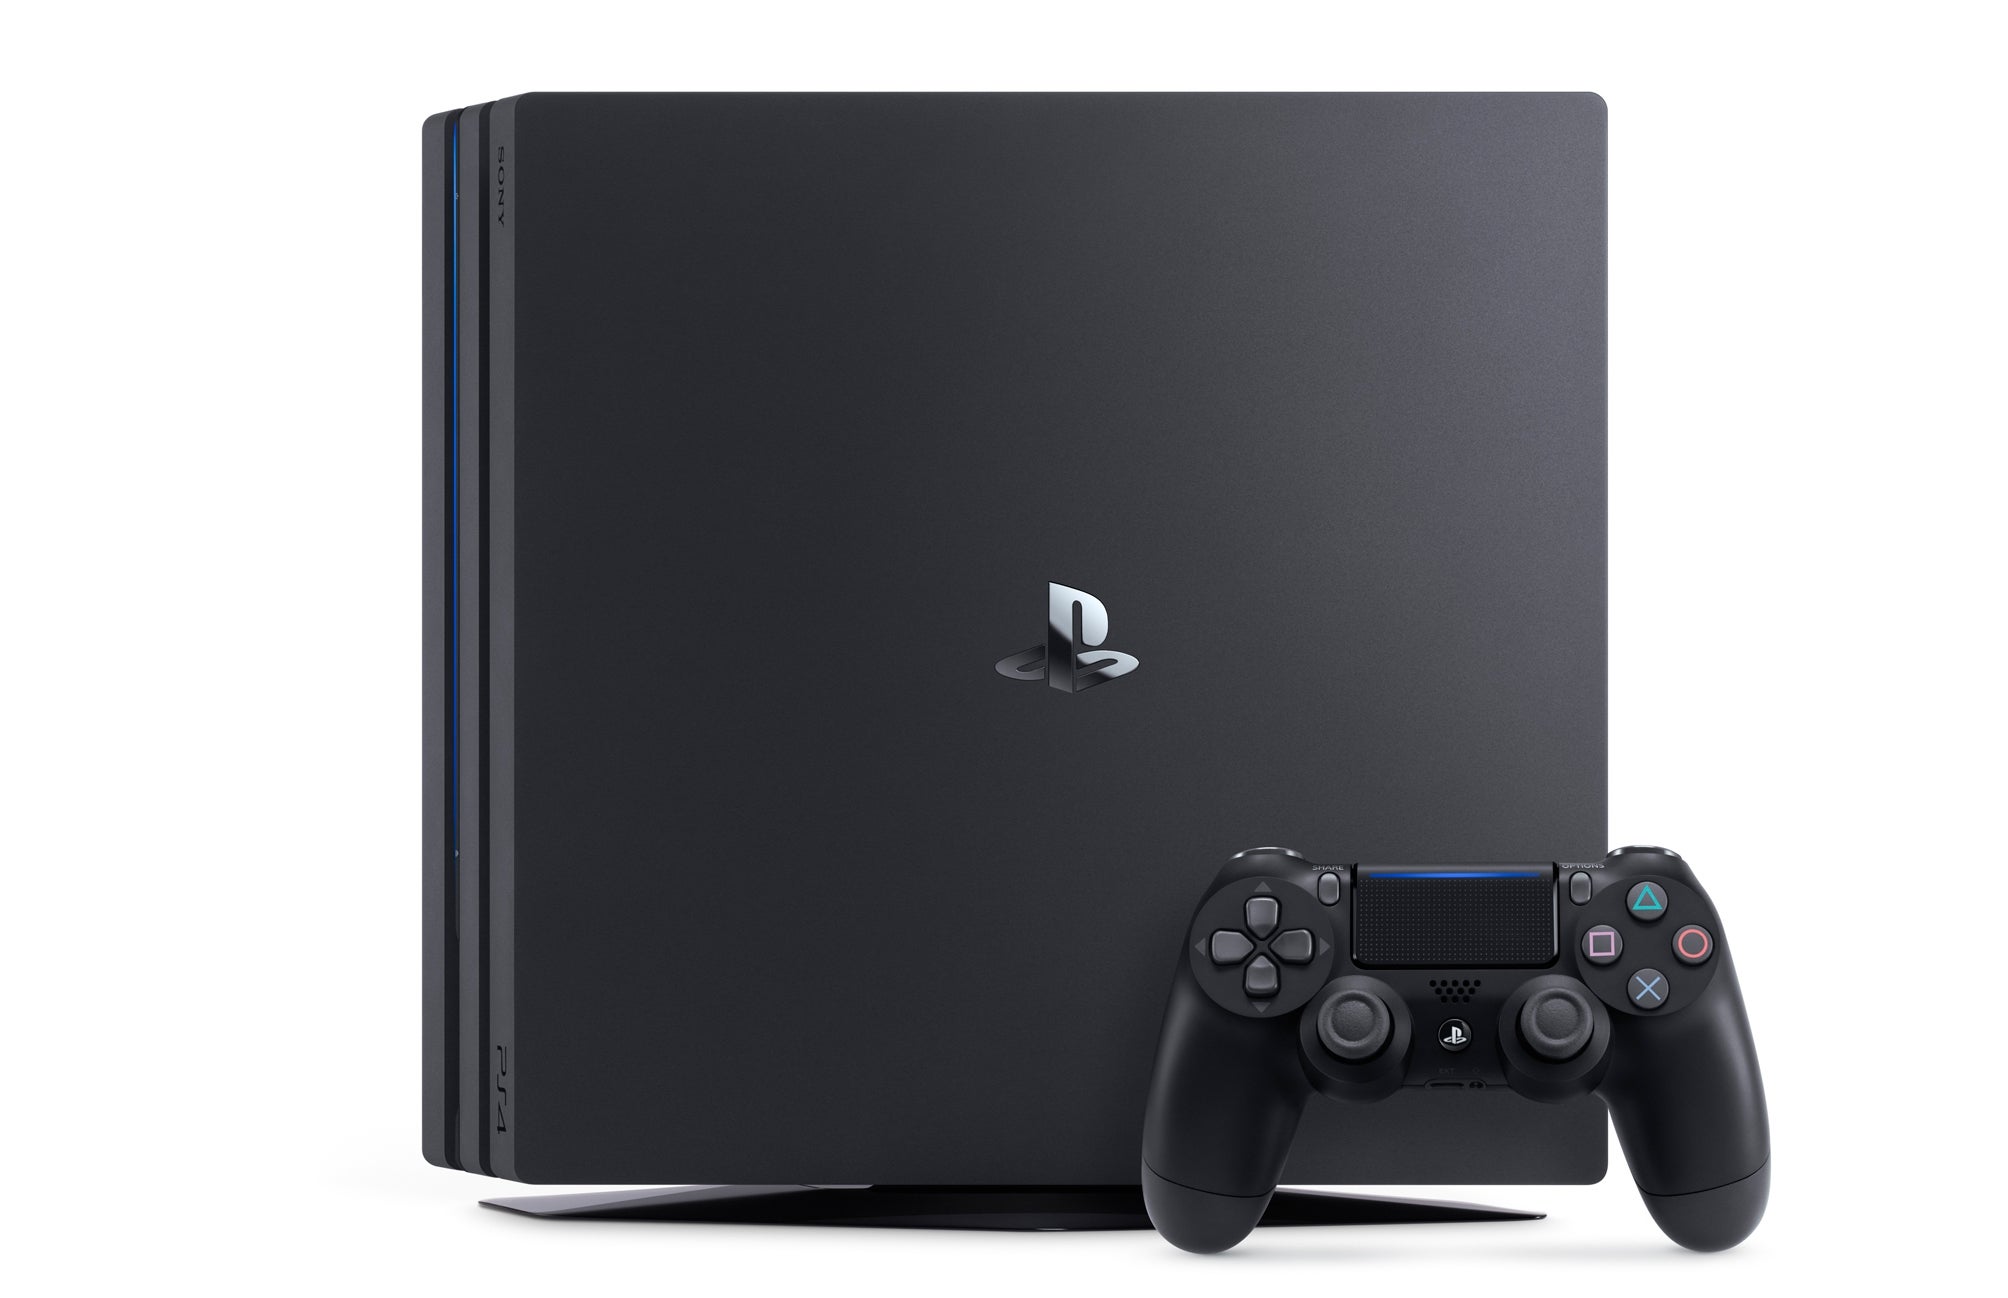 PS4 price, hands-on, specs, controller: everything you need to decide whether to buy | VG247